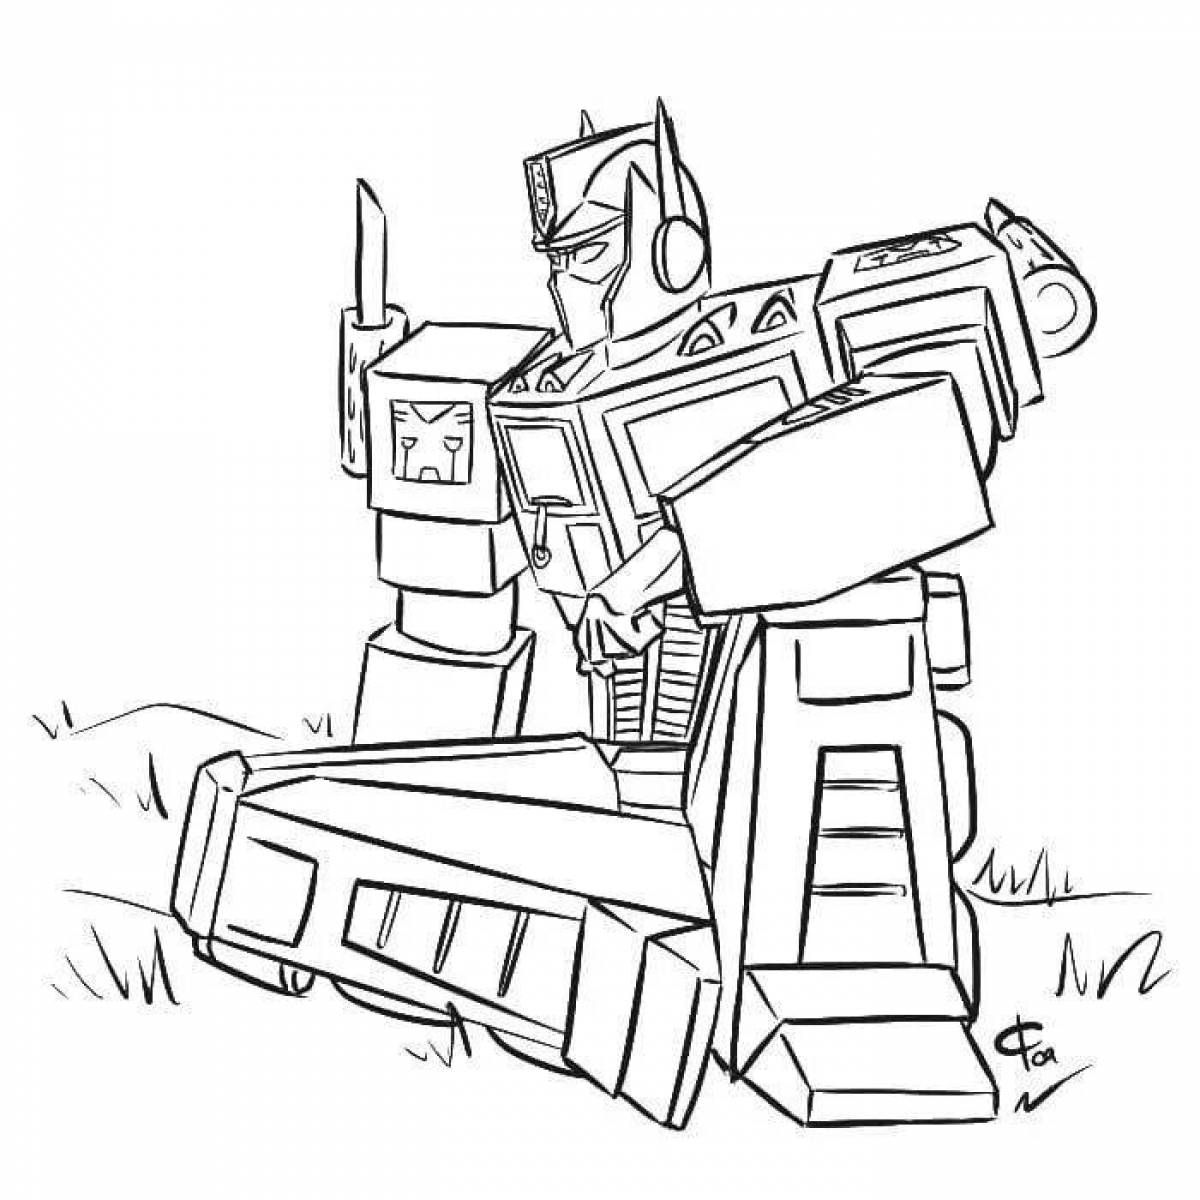 Colorfully illustrated Transformers Prime coloring page